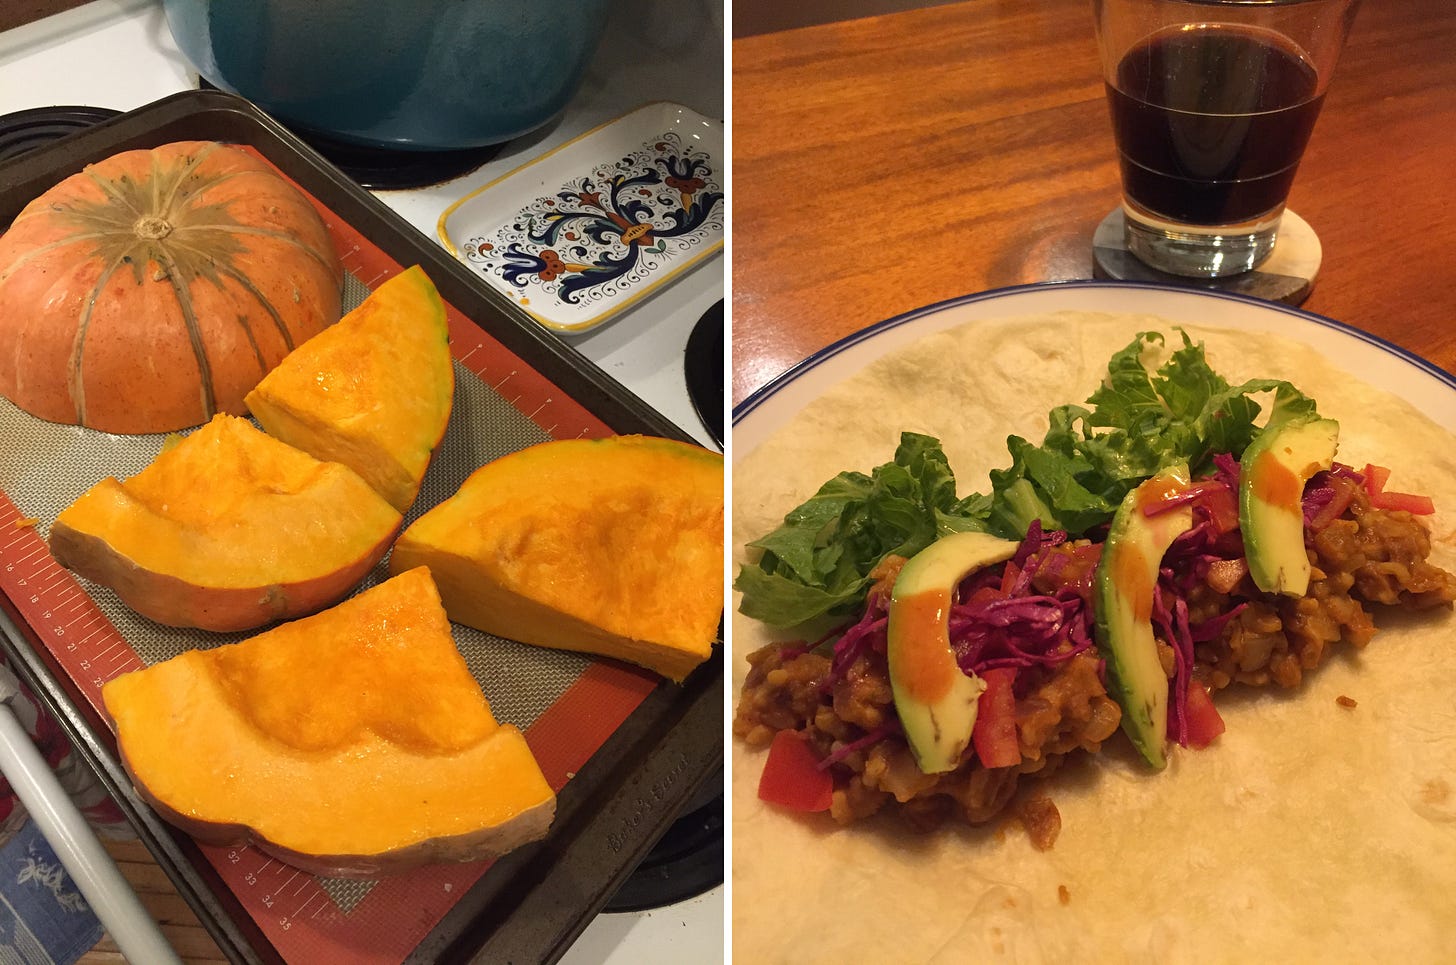 left image: an orange winter squash with green stripes cut into pieces on a large baking sheet. Right image: a burrito before being folded, with avocado, tomato, lettuce, and pickled cabbage on top of a bean and rice filling.